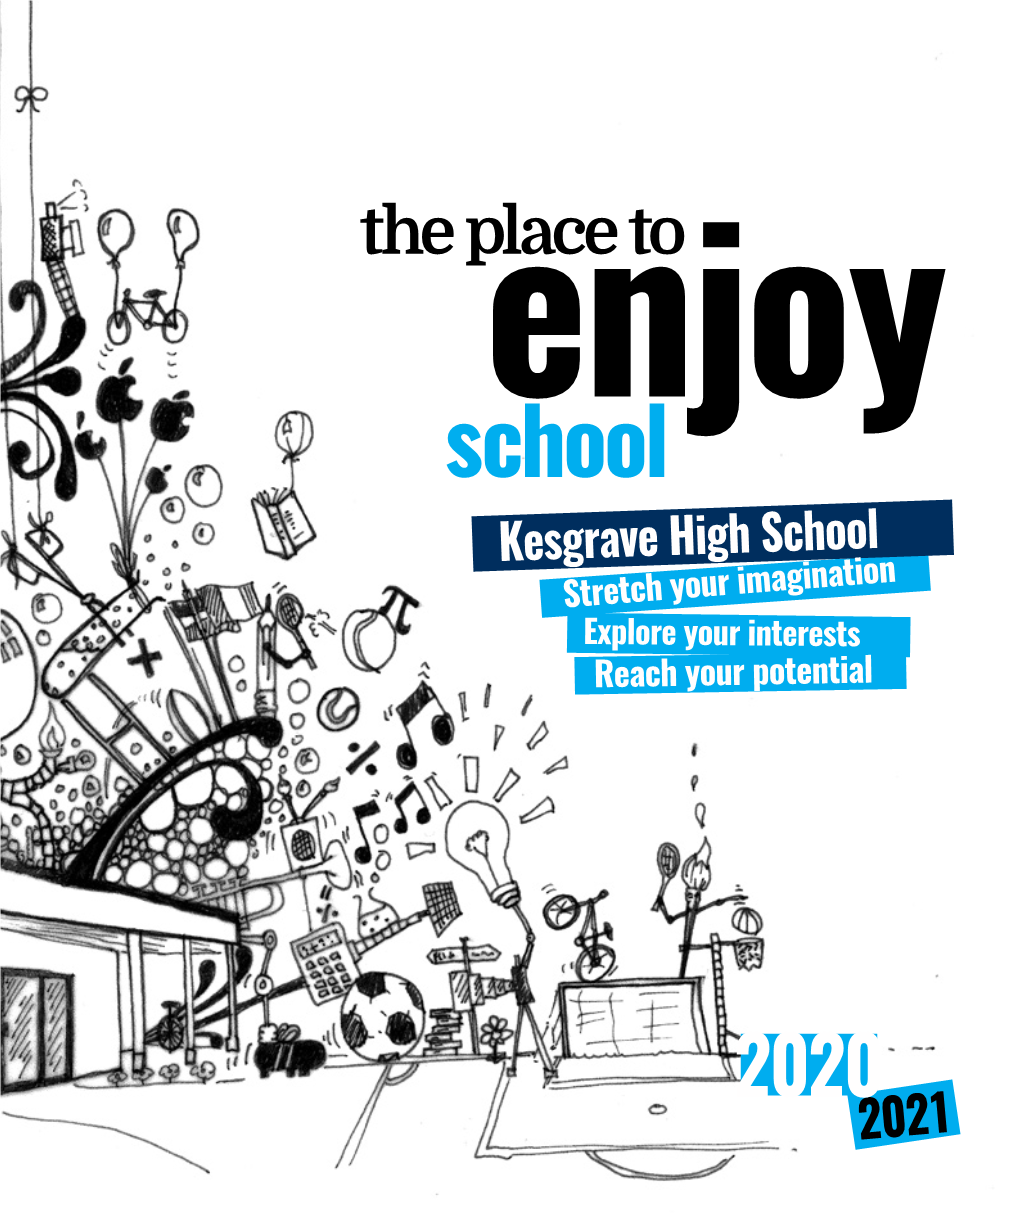 Kesgrave High School Stretch Your Imagination Explore Your Interests Reach Your Potential